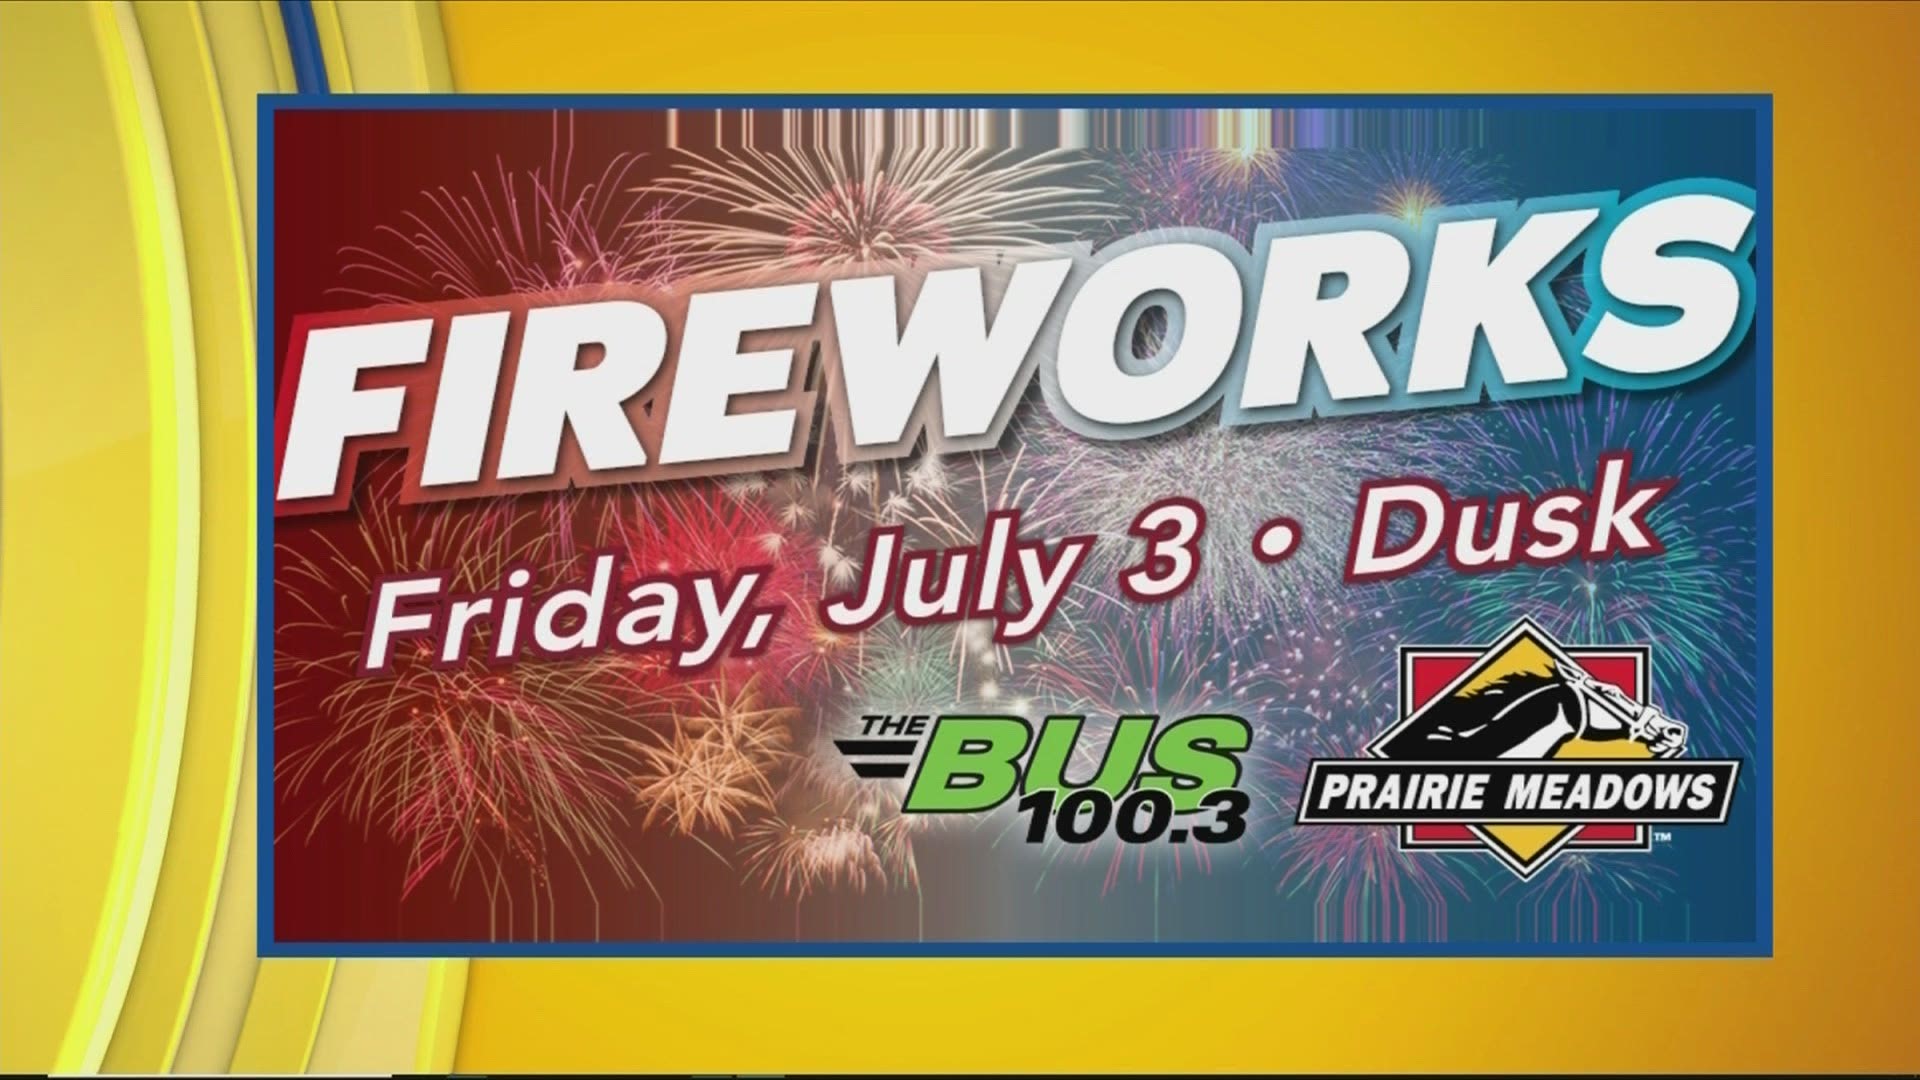 Prairie Meadows will light off their firework display on Friday, July 3